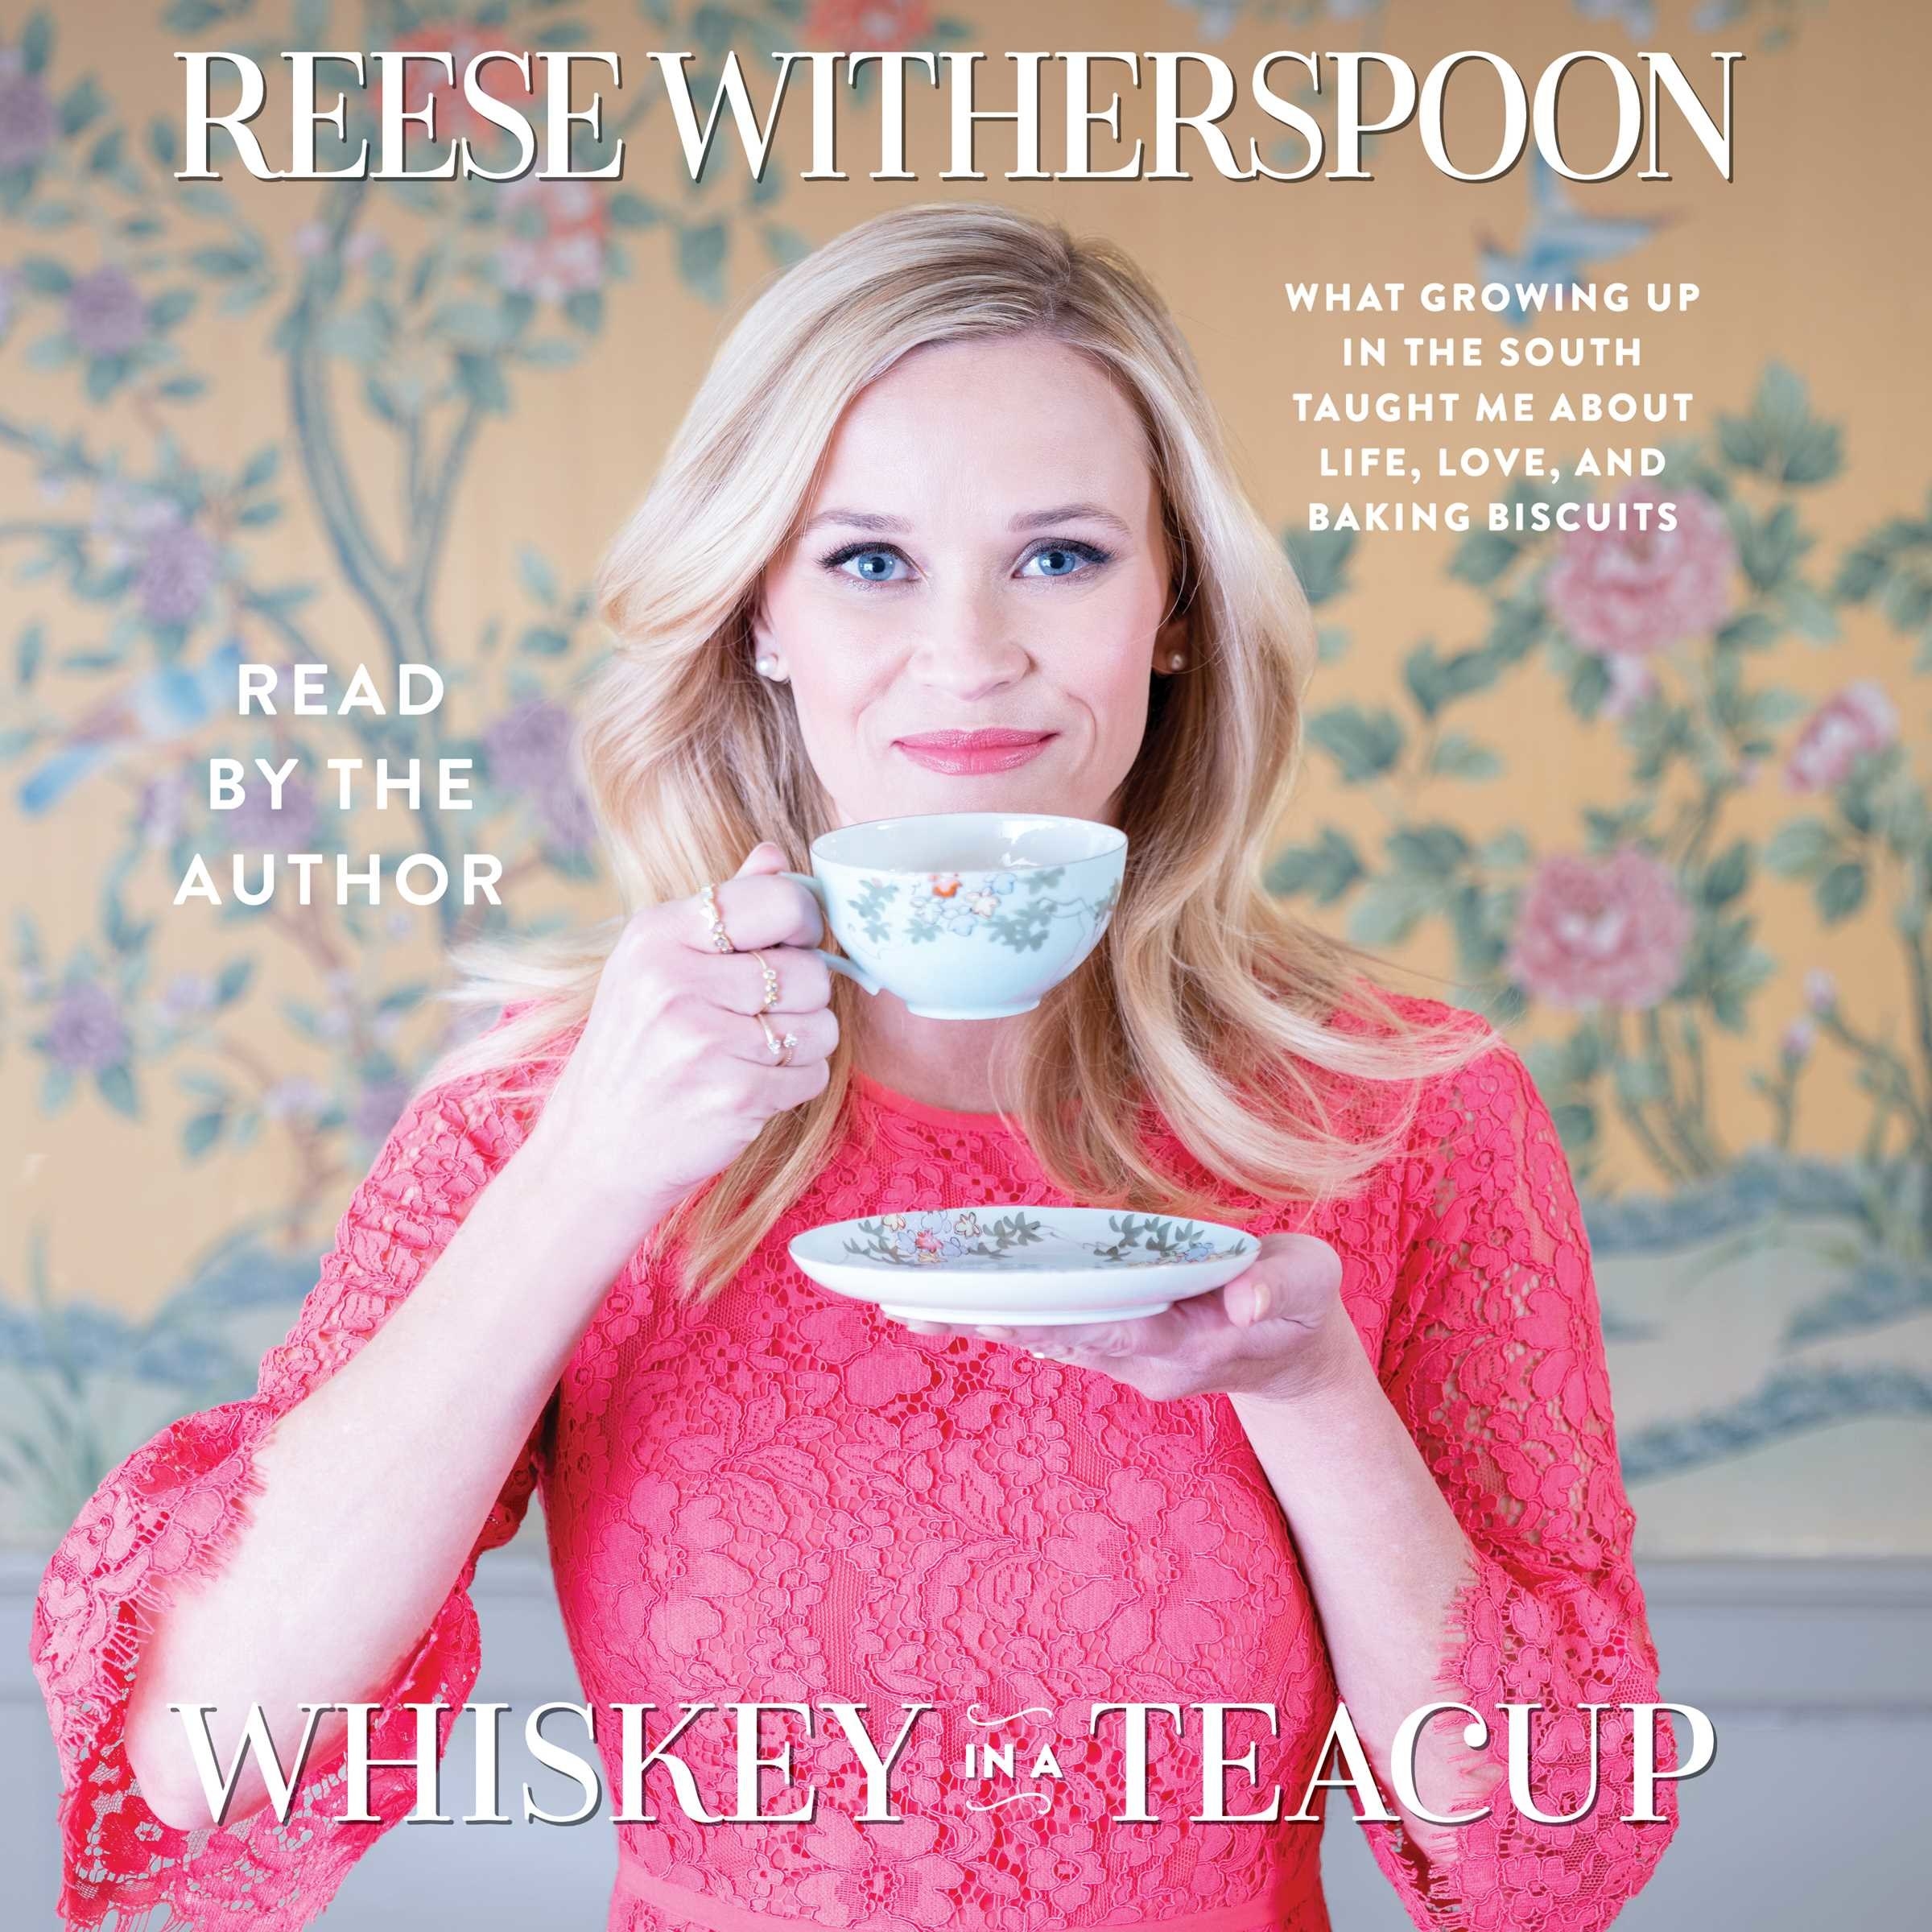 reese witherspoon drinking out of a teacup, with text that says whiskey in a tea cup, what growing up in the south taught me about life, love, and baking biscuits.